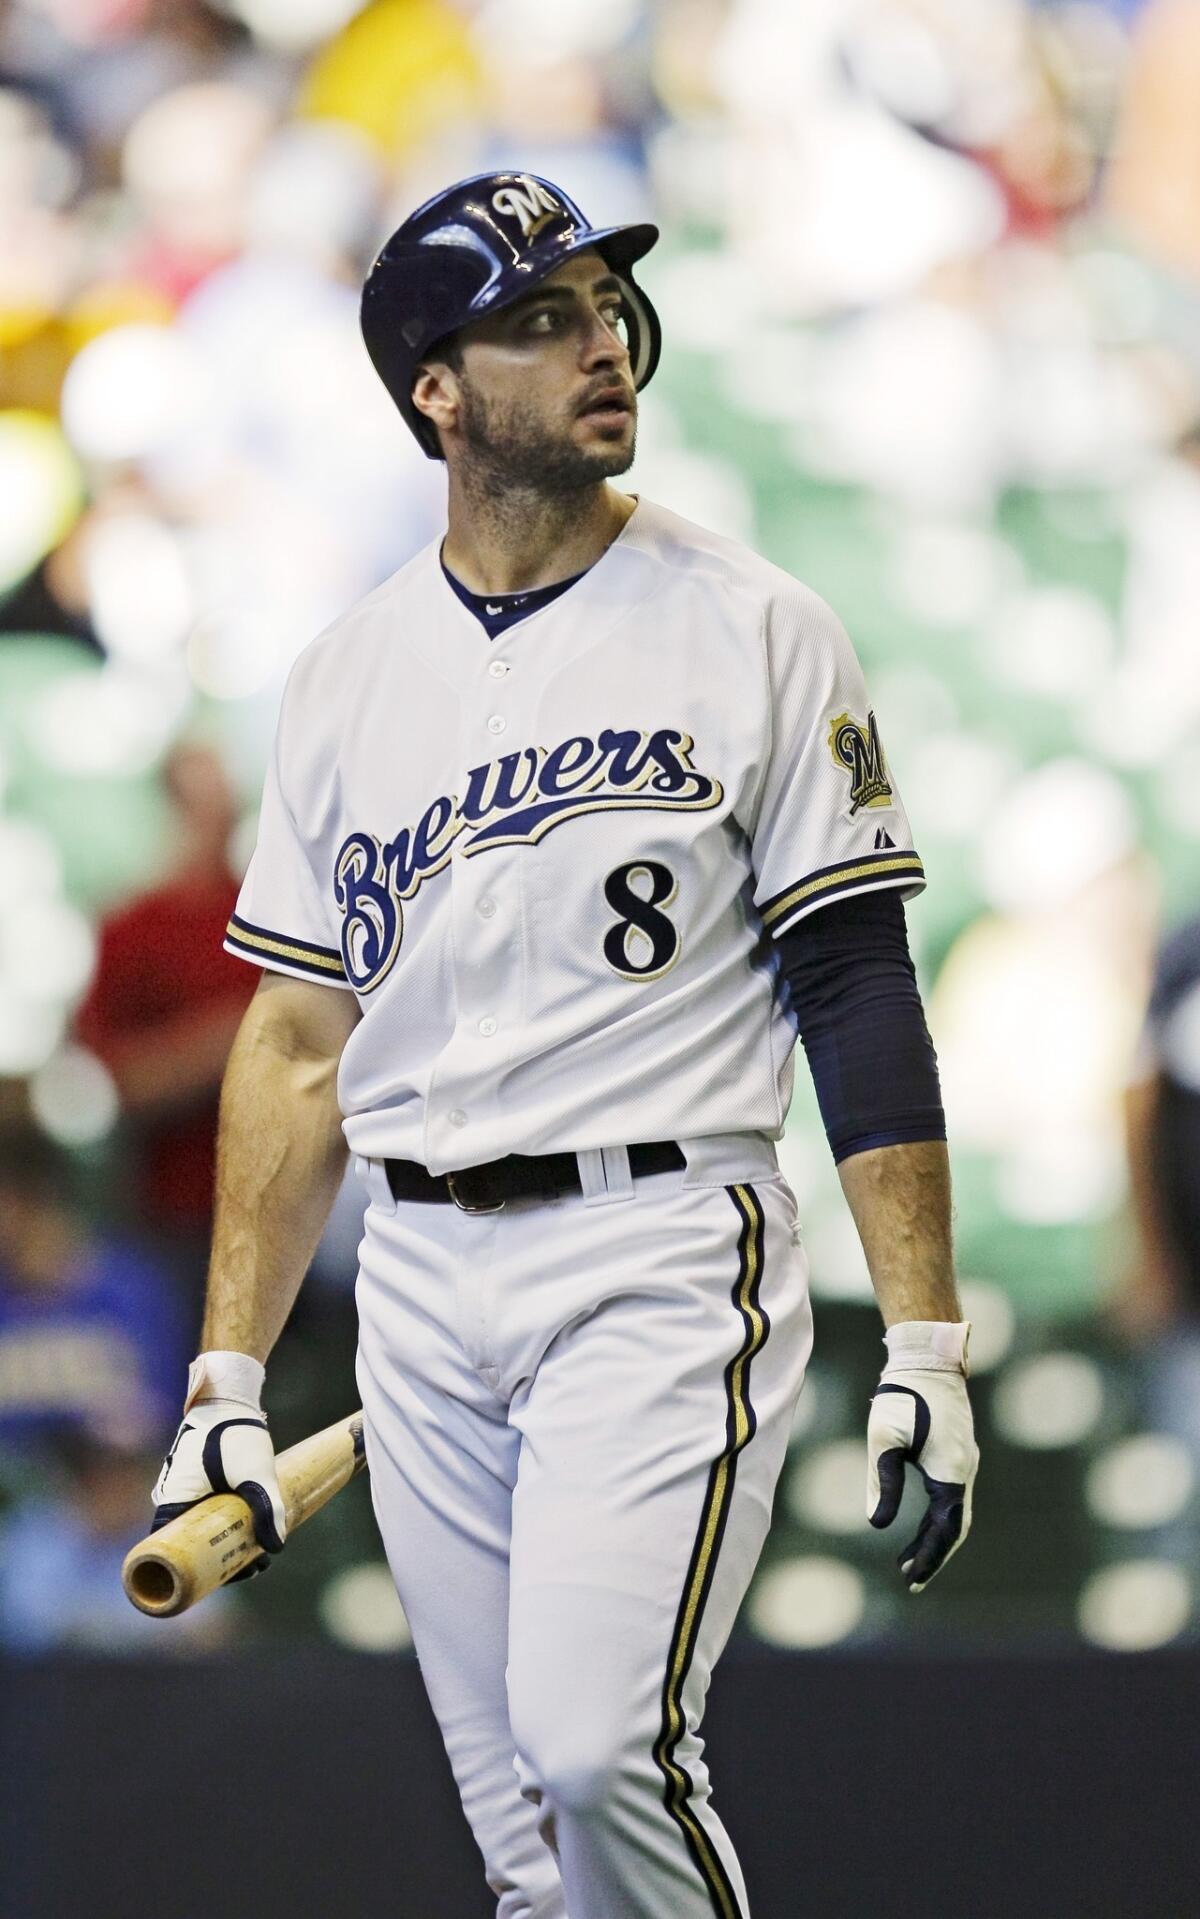 Ryan Braun of the Milwaukee Brewers was suspended 65 games Monday for violating Major League Baseball's drug policy.